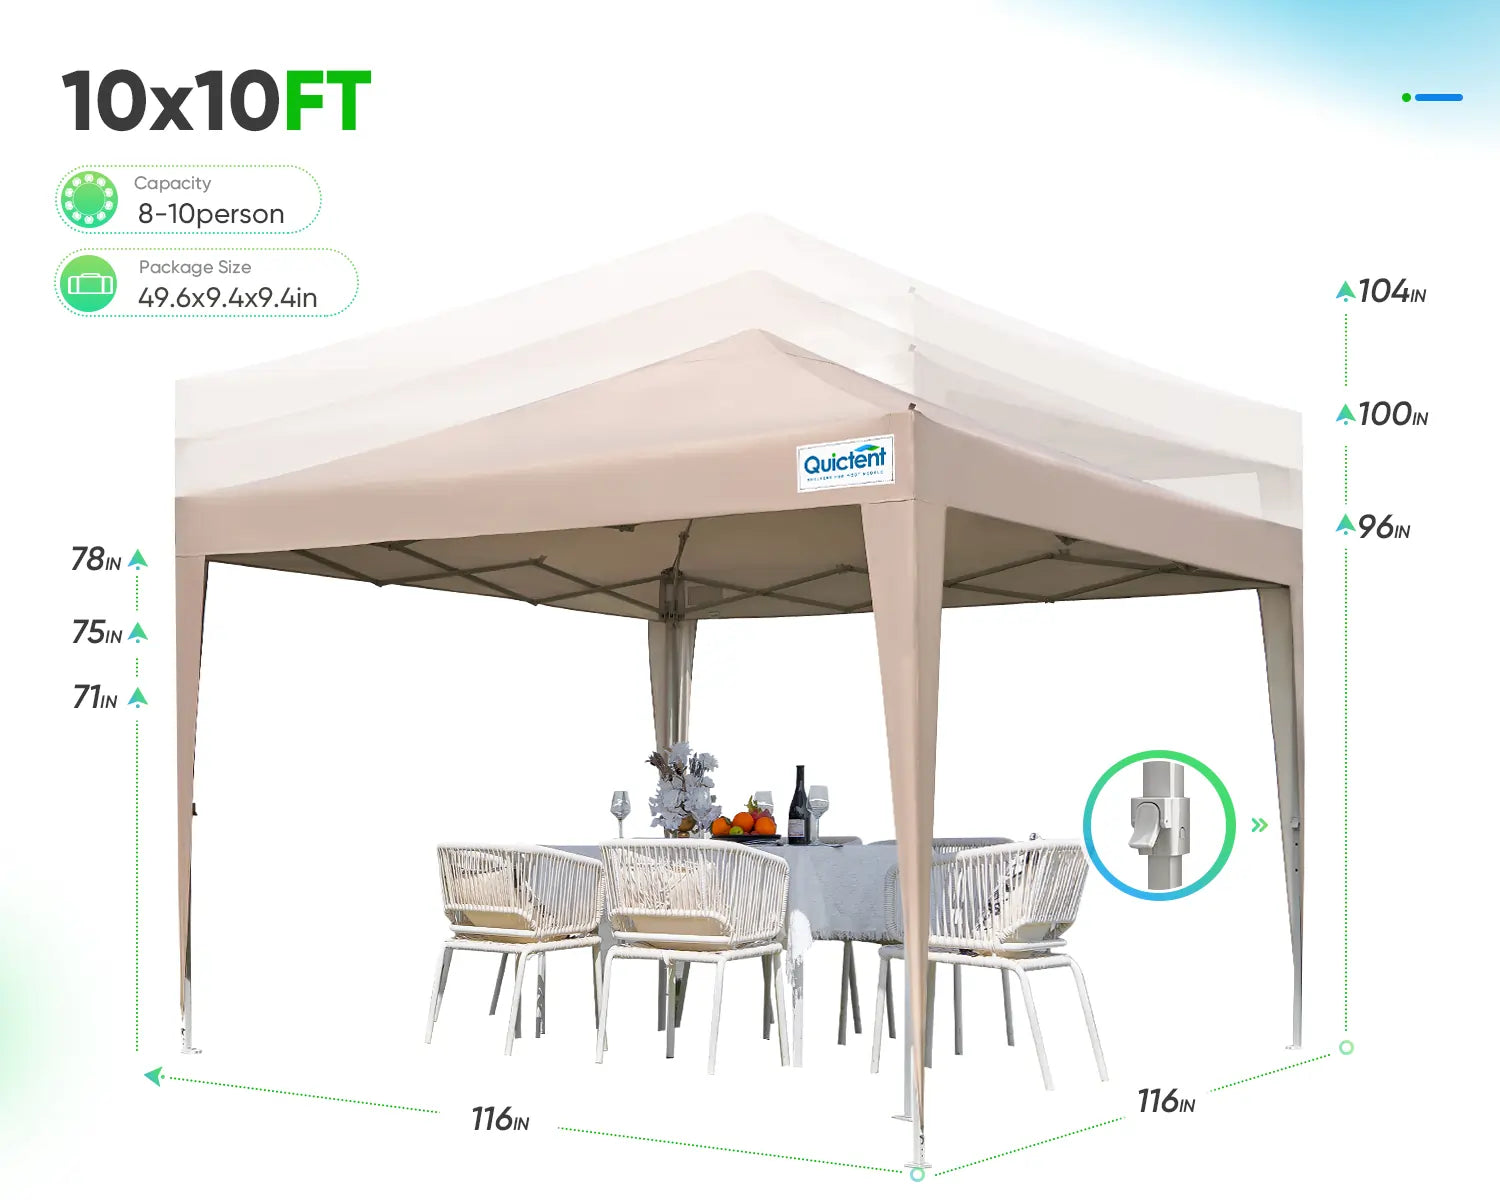 10x10 canopy with 3 height options